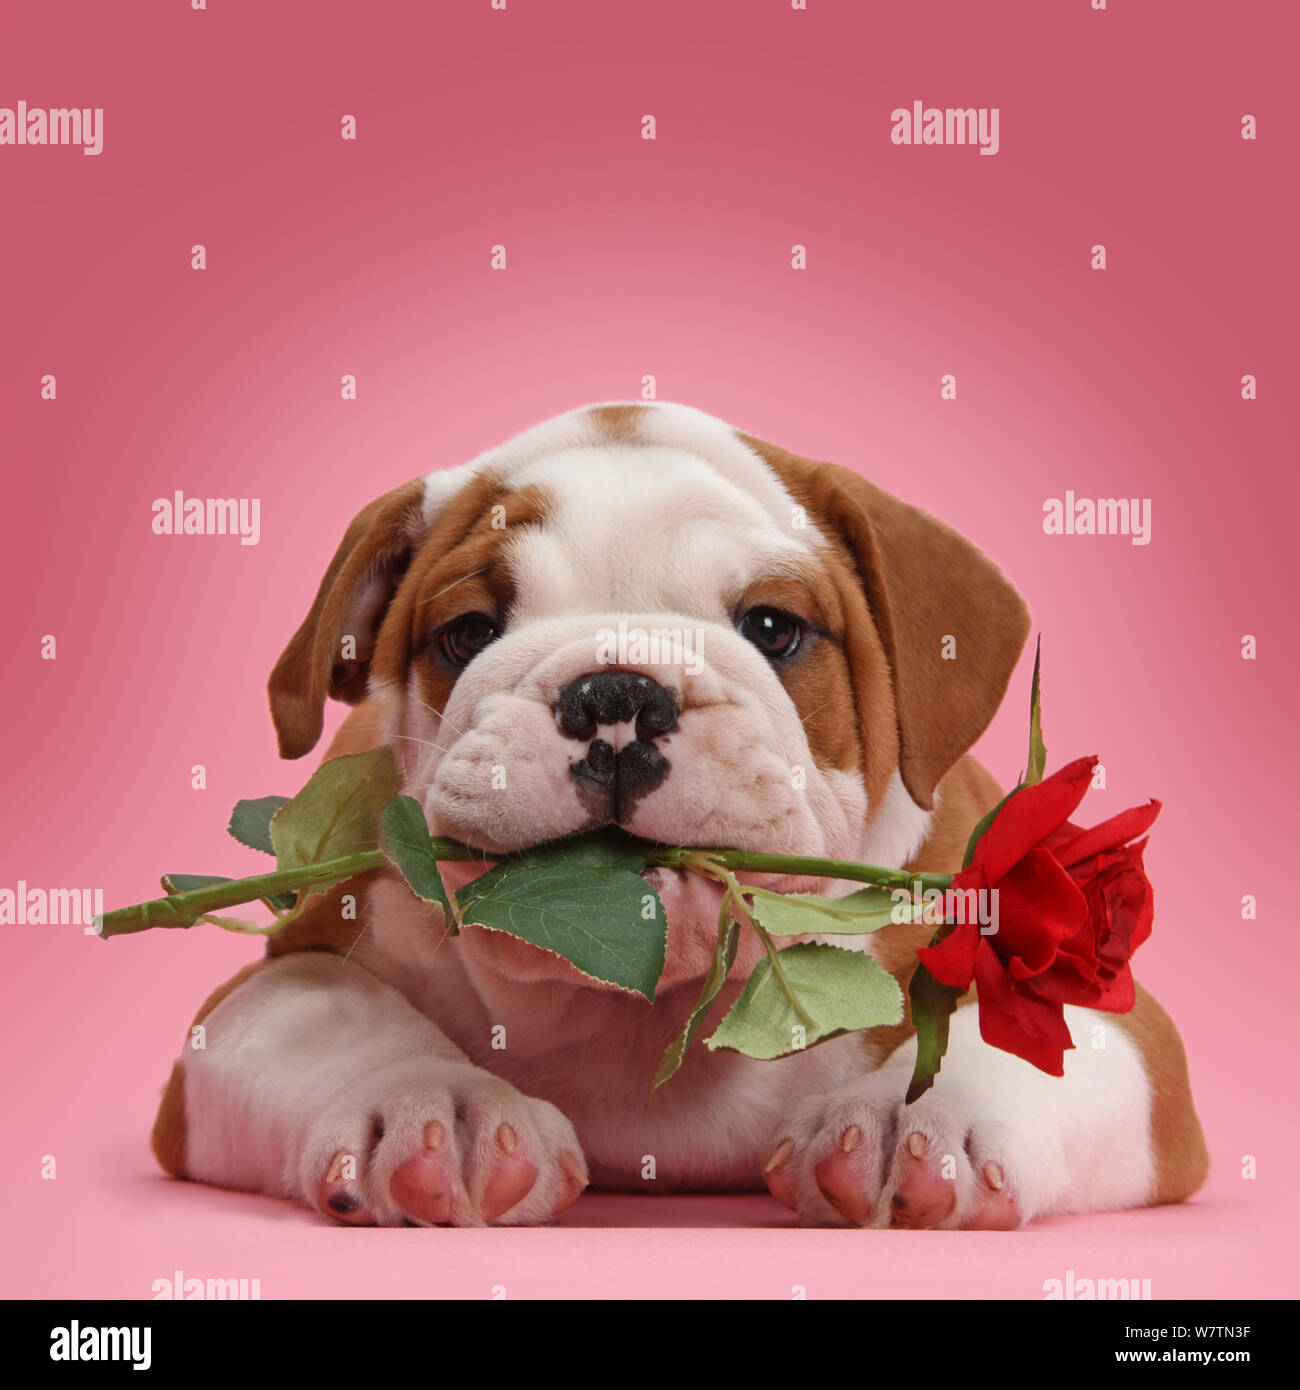 Bulldog puppy with red rose. Stock Photo